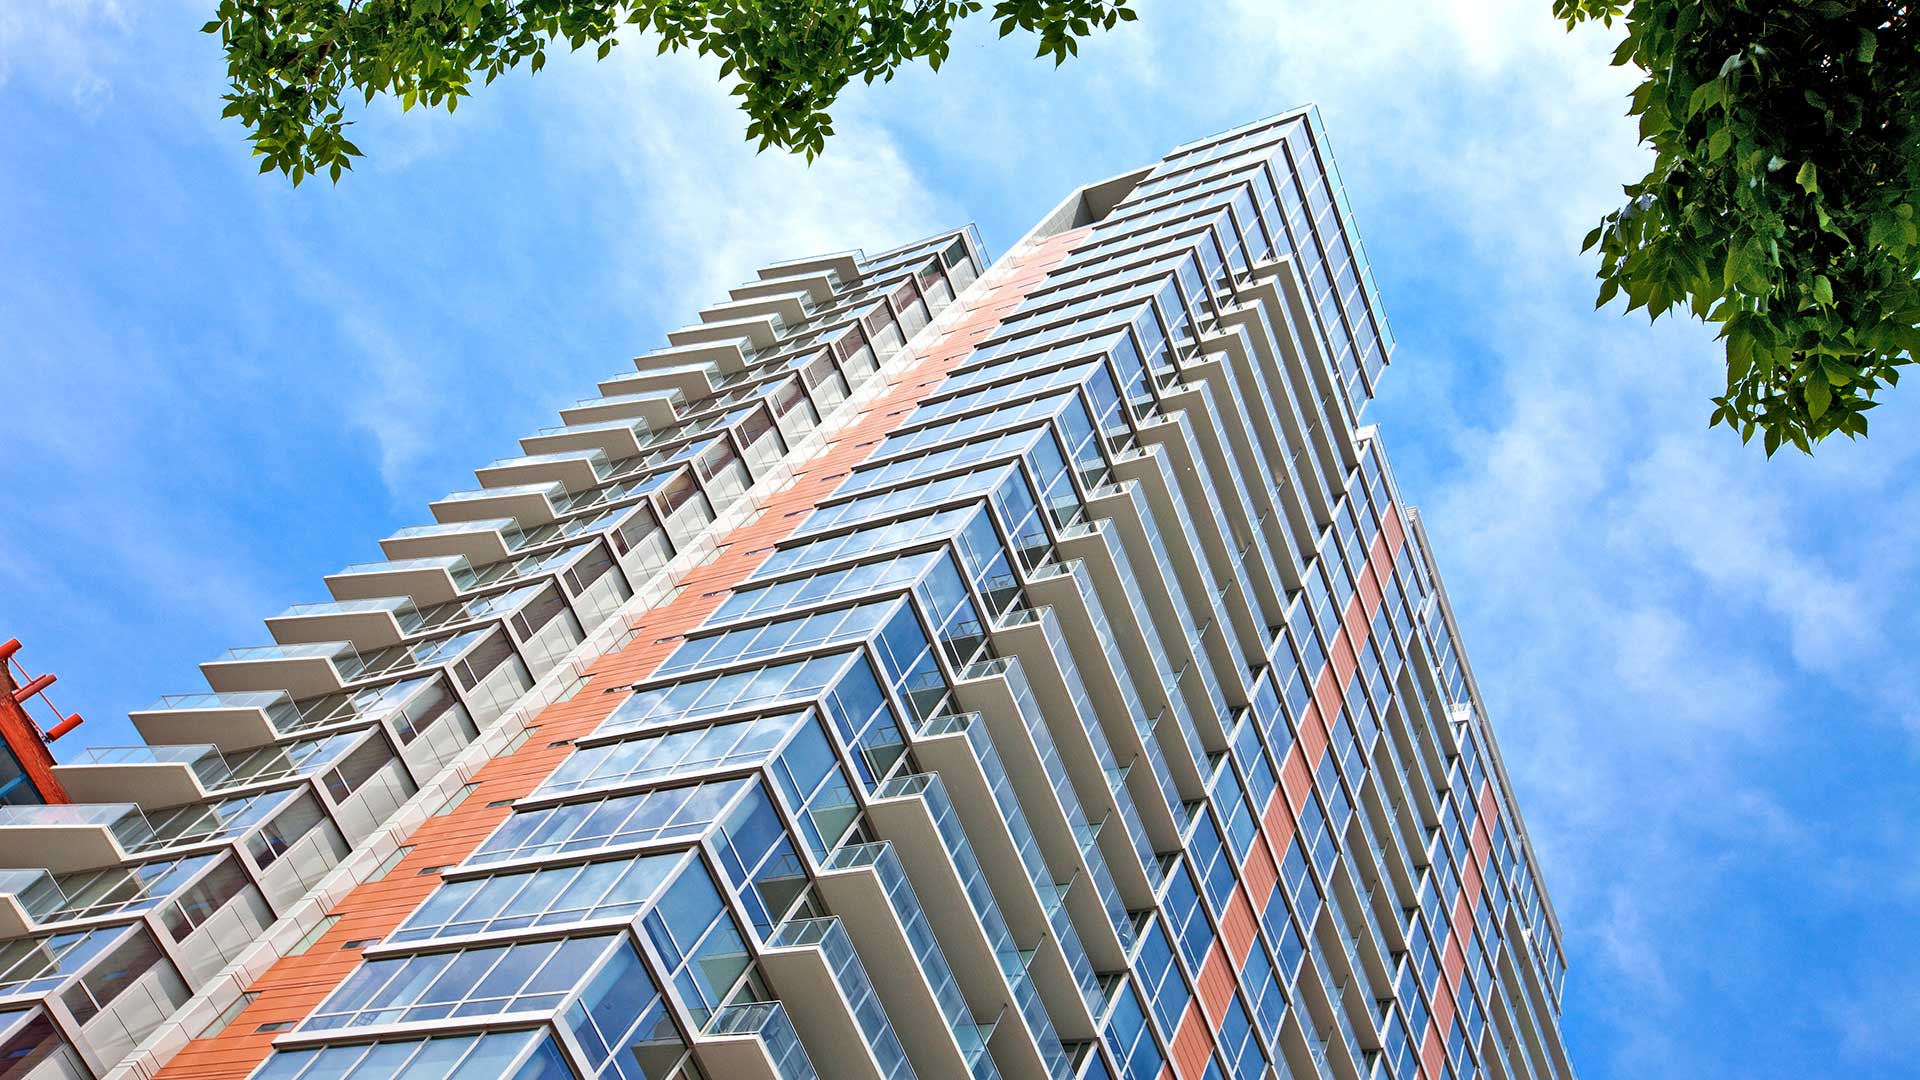 Looking up the Burnham Pointe apartment tower from the street below on a clear day. The building is mainly large glass windows and balconies all the way up.